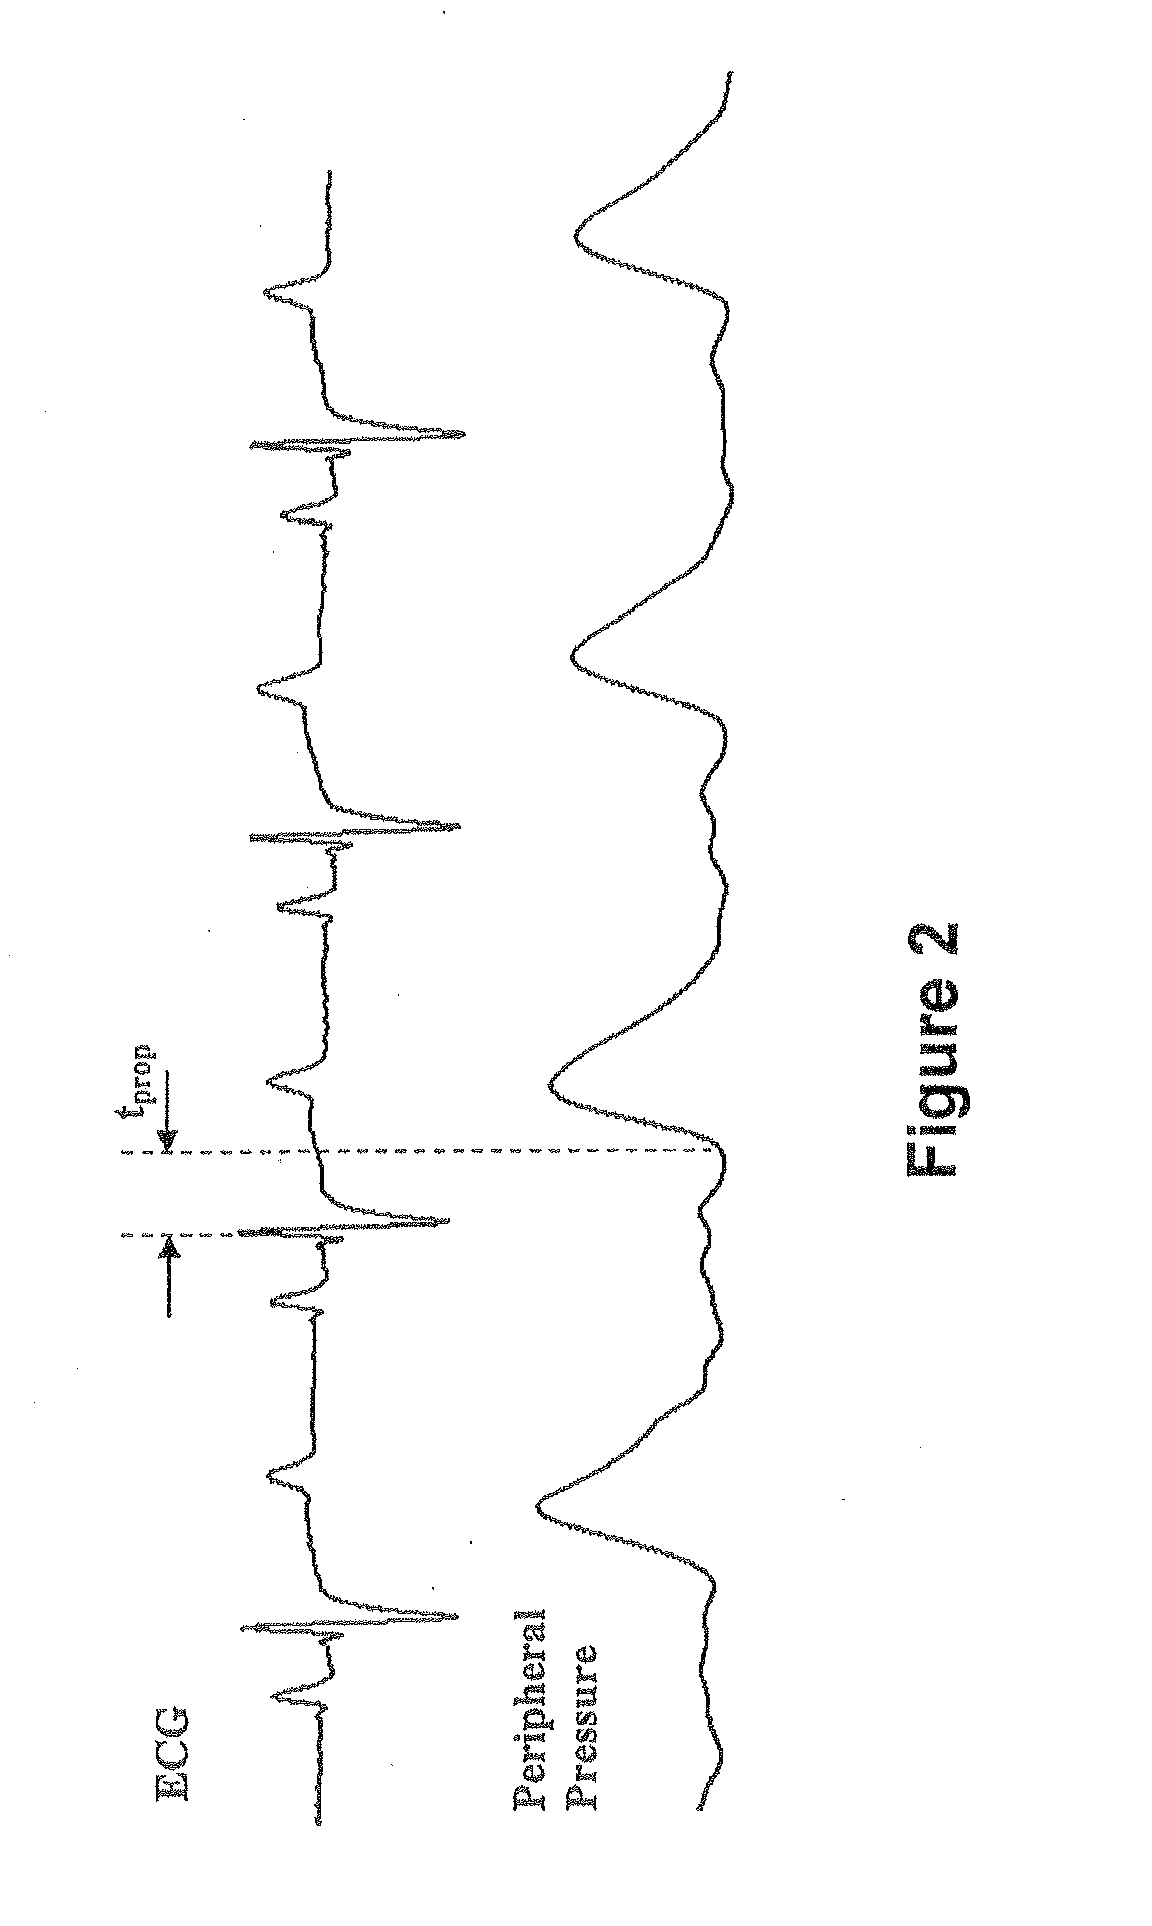 Method and Apparatus for Continuous Assessment of a Cardiovascular Parameter Using the Arterial Pulse Pressure Propagation Time and Waveform